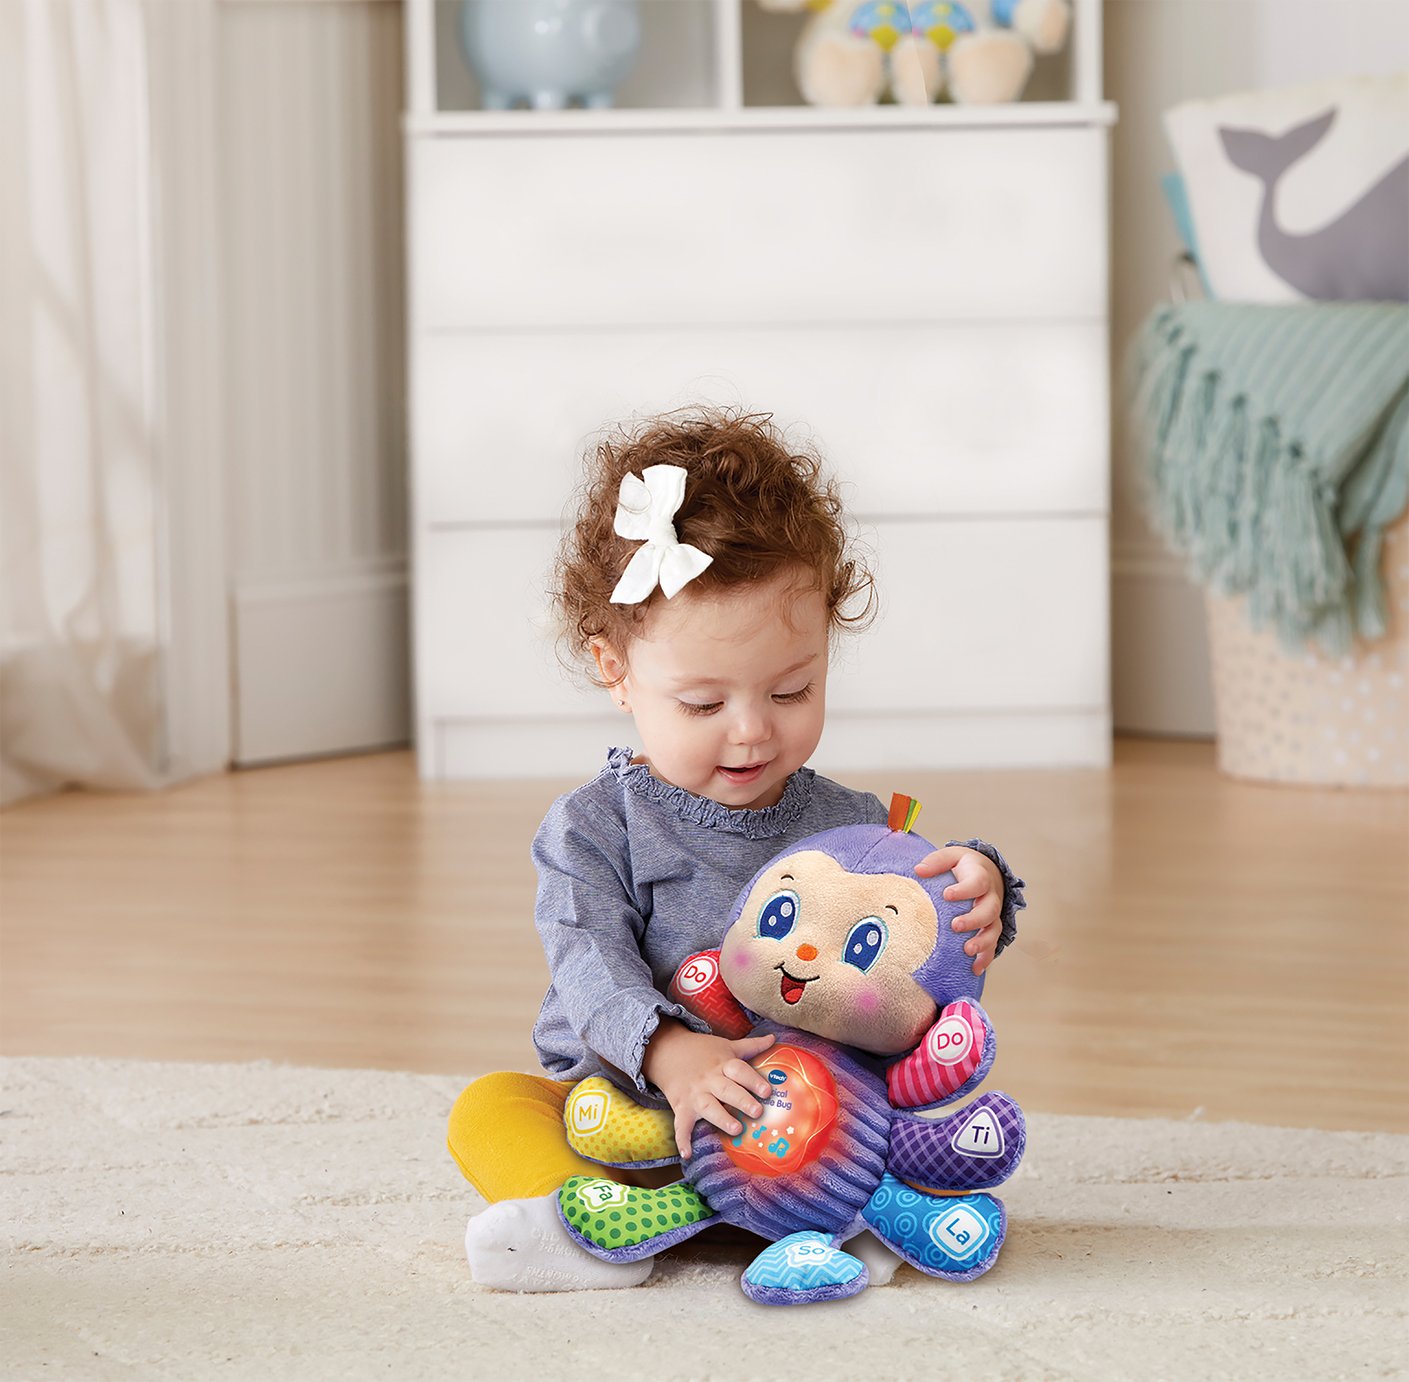 VTech Musical Cuddle Bug Soft Toy Review